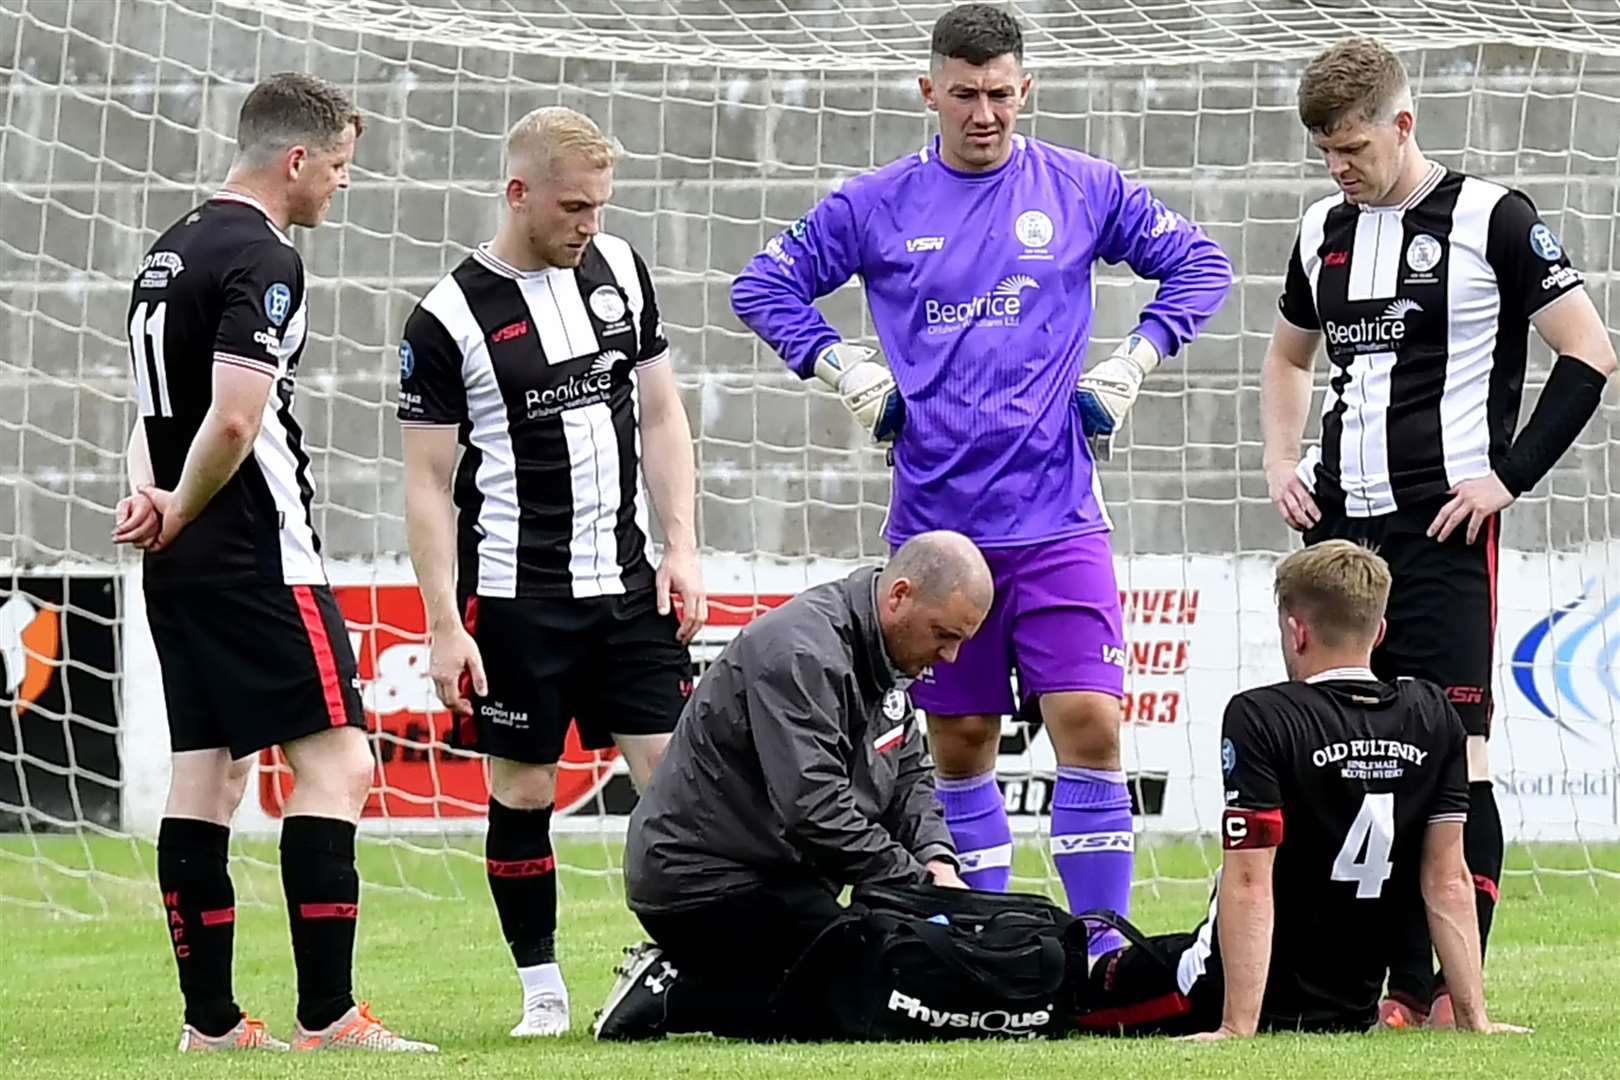 Concerned team-mates look on as Alan Farquhar lies injured at Lossiemouth's Grant Park in August 2021. Picture: Mel Roger